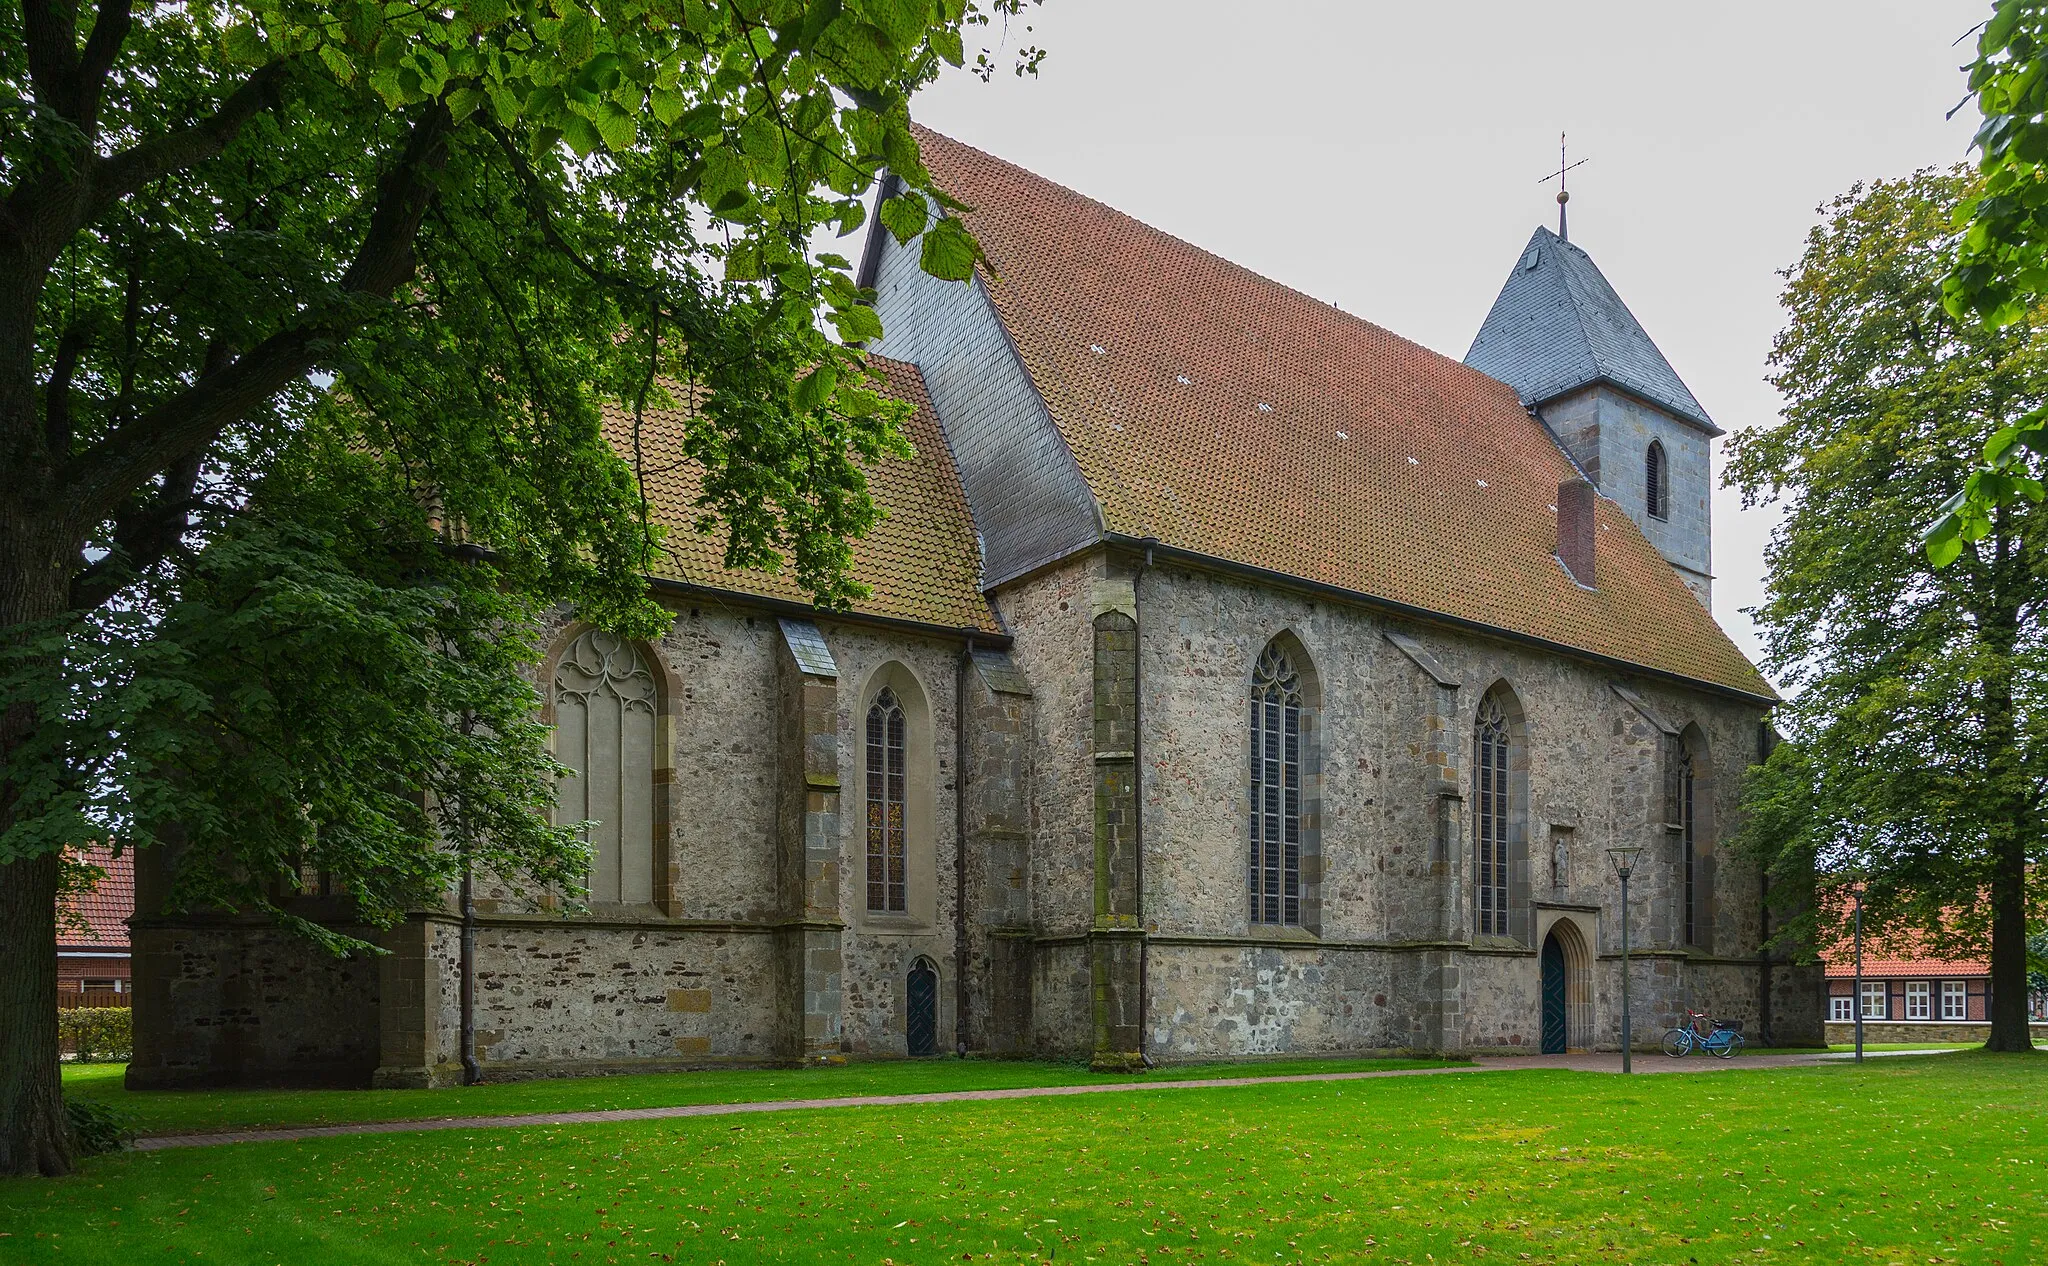 Photo showing: The Reformed Church of Lengerich, Landkreis Emsland, Lower Saxony, Germany. The building is a listed cultural heritage monument.